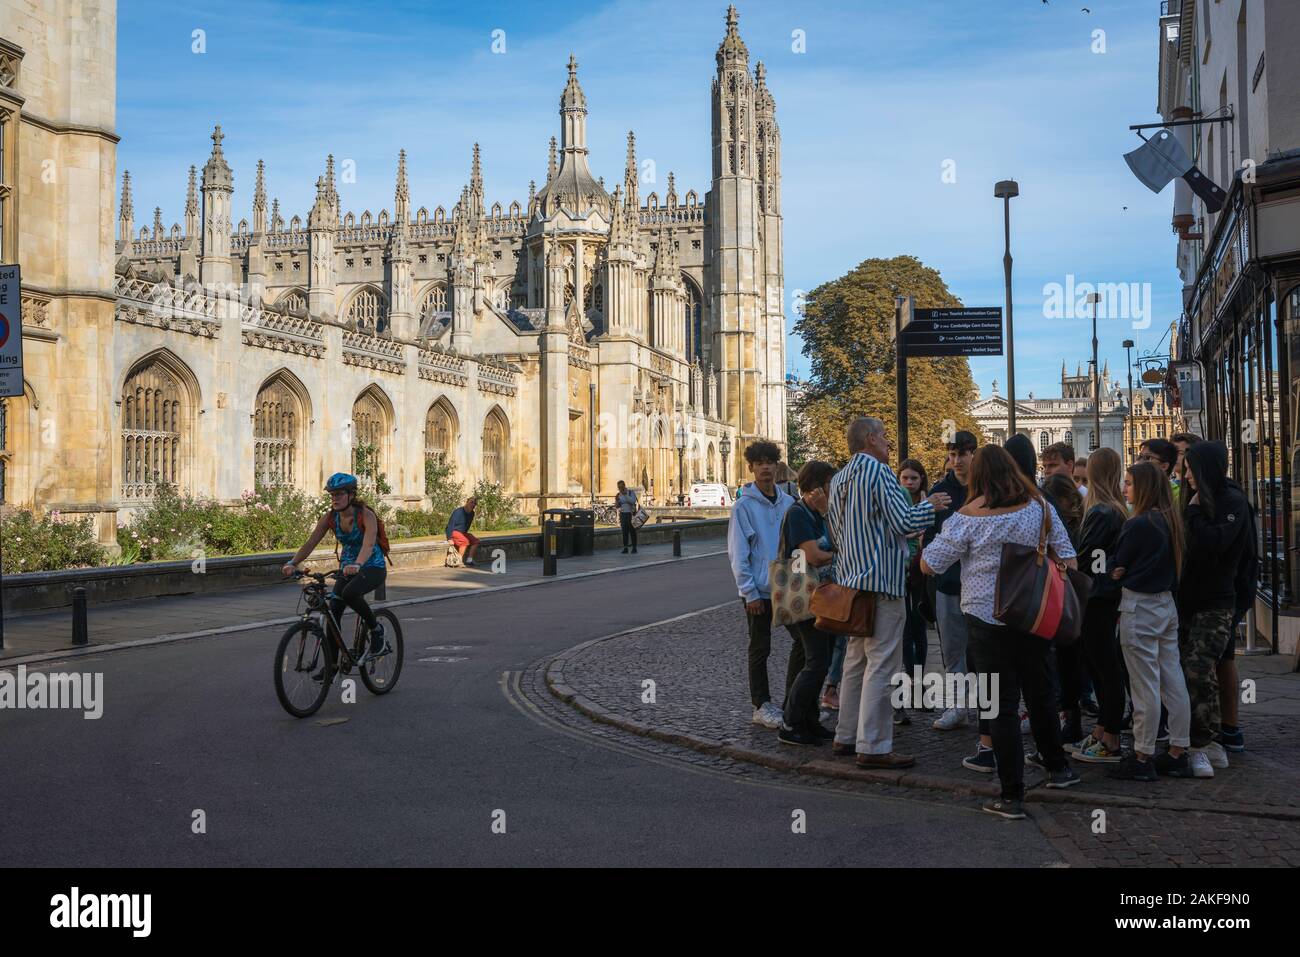 UK university street, view of young people in King's Parade, Cambridge,  with the entrance to King's College visible beyond them, England, UK Stock Photo